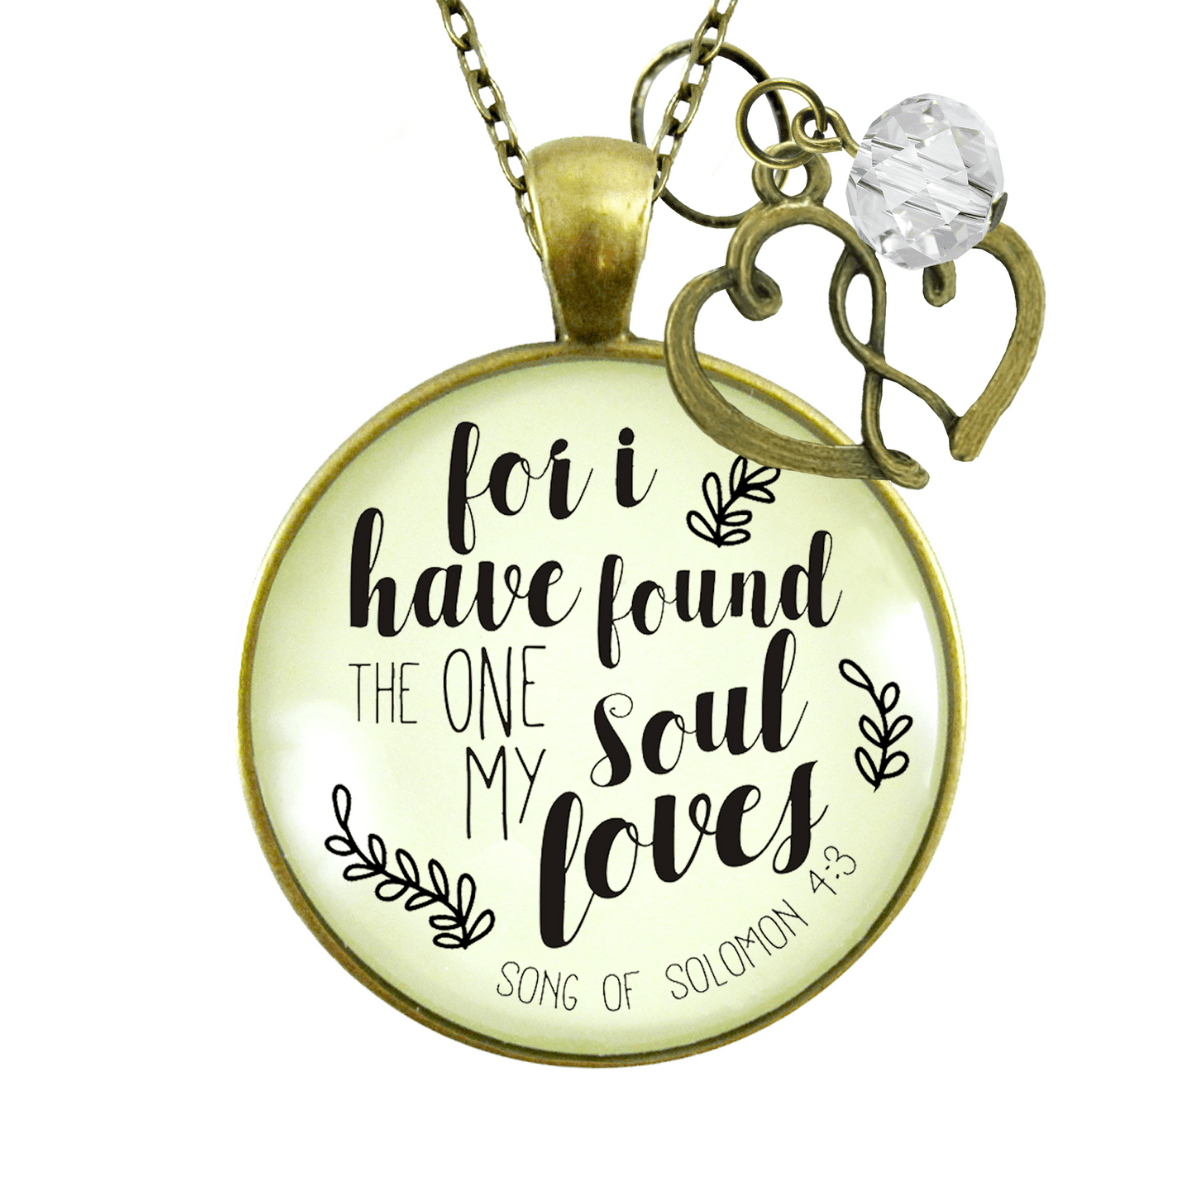 Gutsy Goodness Love My Wife Necklace I've Found One Soul Loves Romantic Jewelry Gift - Gutsy Goodness Handmade Jewelry;Love My Wife Necklace I've Found One Soul Loves Romantic Jewelry Gift - Gutsy Goodness Handmade Jewelry Gifts